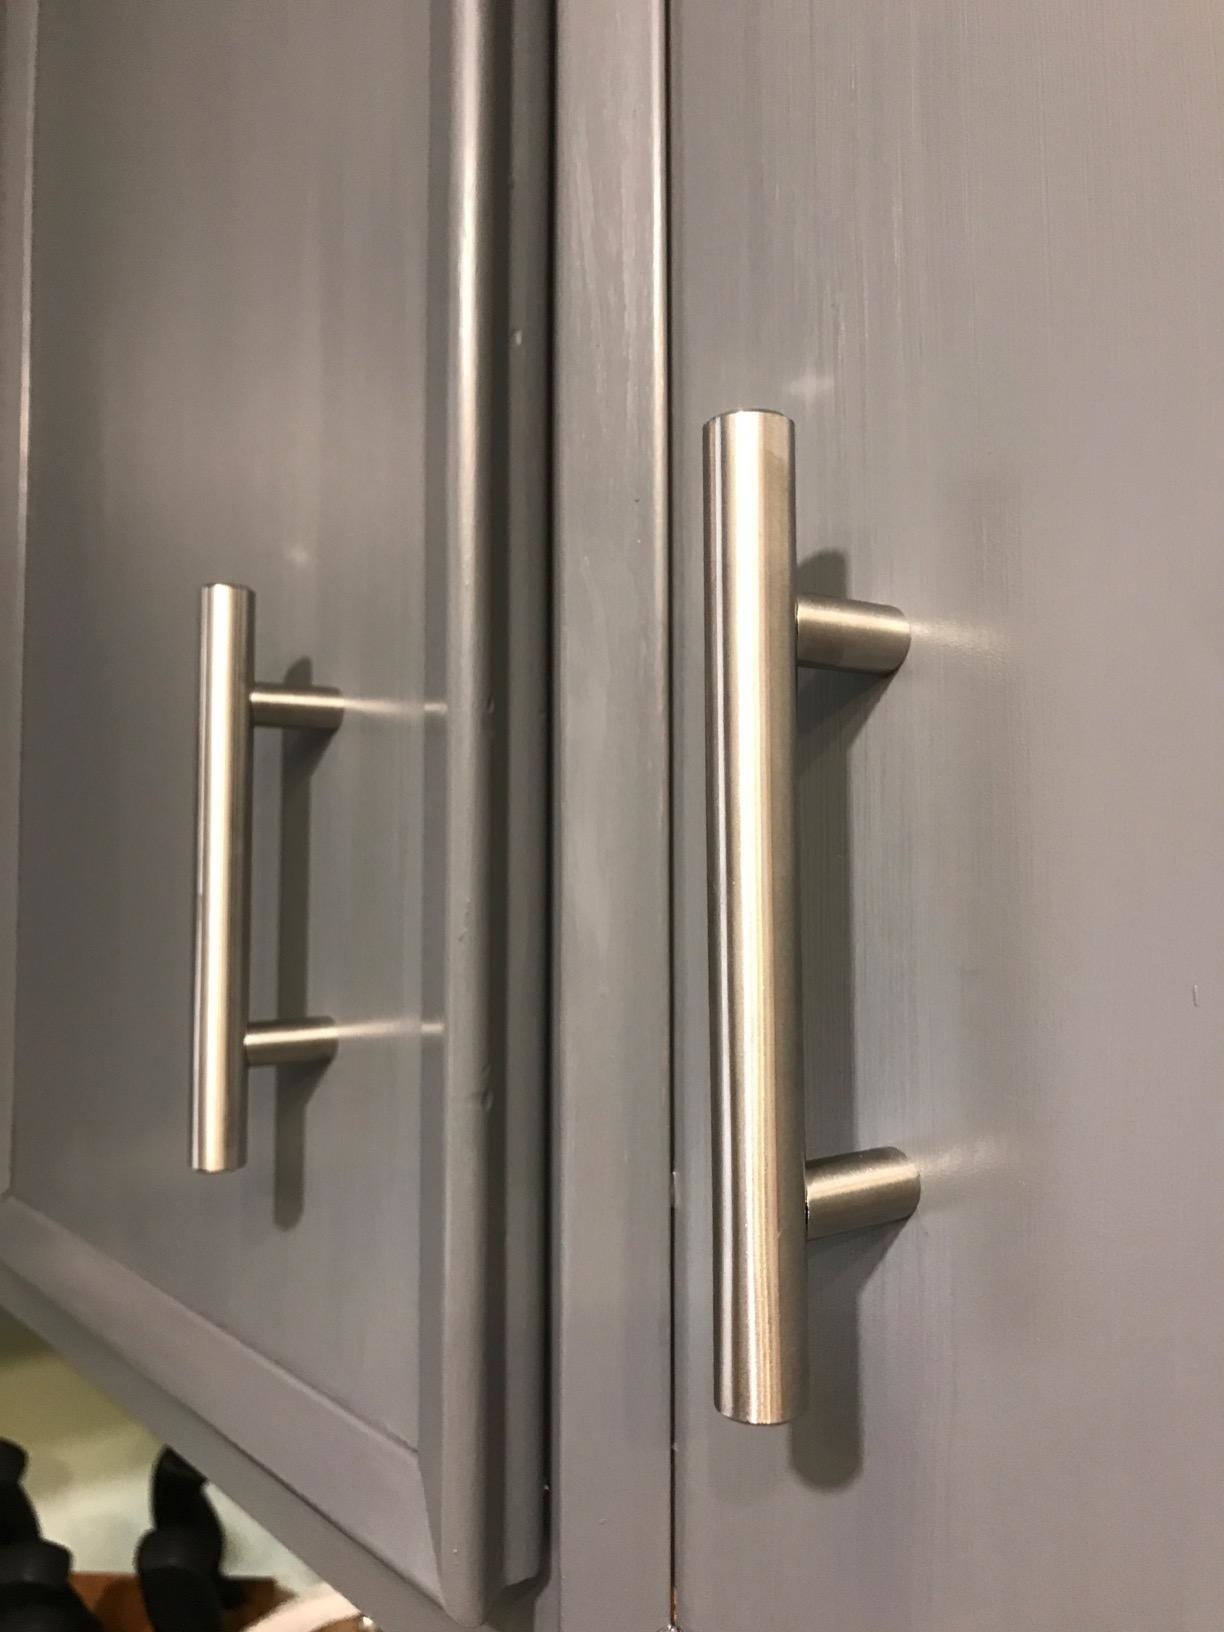 the stainless steel brushed nickel pulls